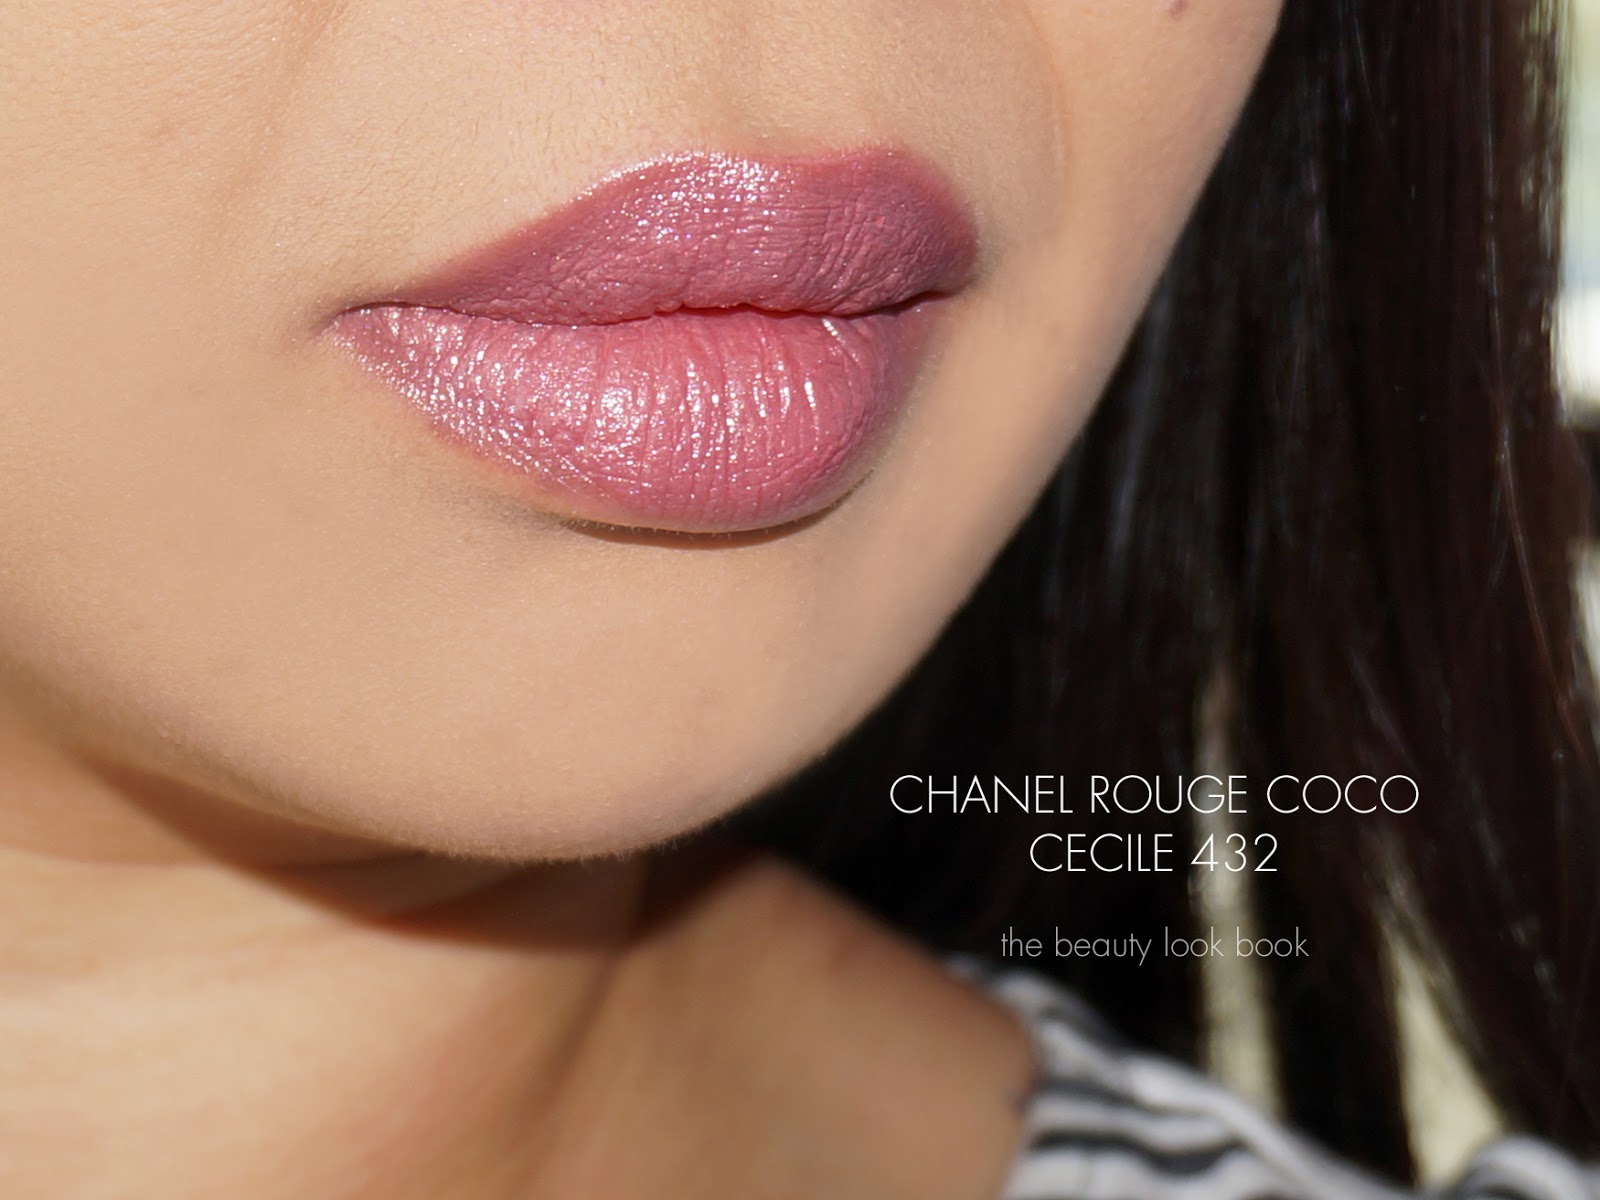 Chanel Rouge Coco Ultra Hydrating Lip Colour | The Beauty Look Book